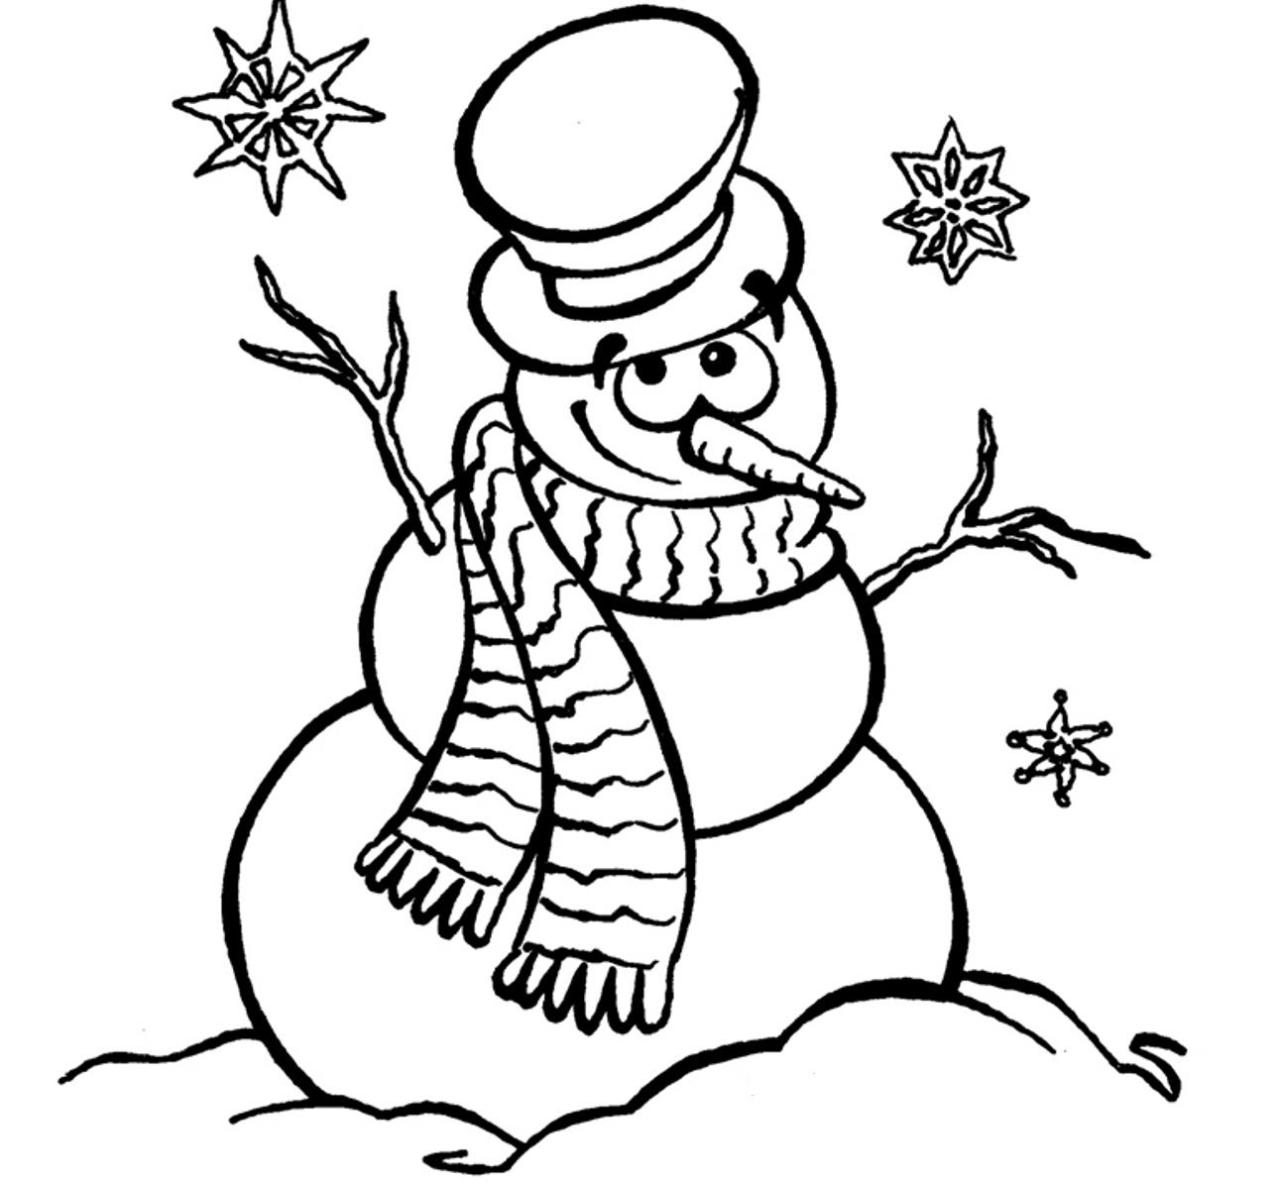 Snowman Coloring Page Simple